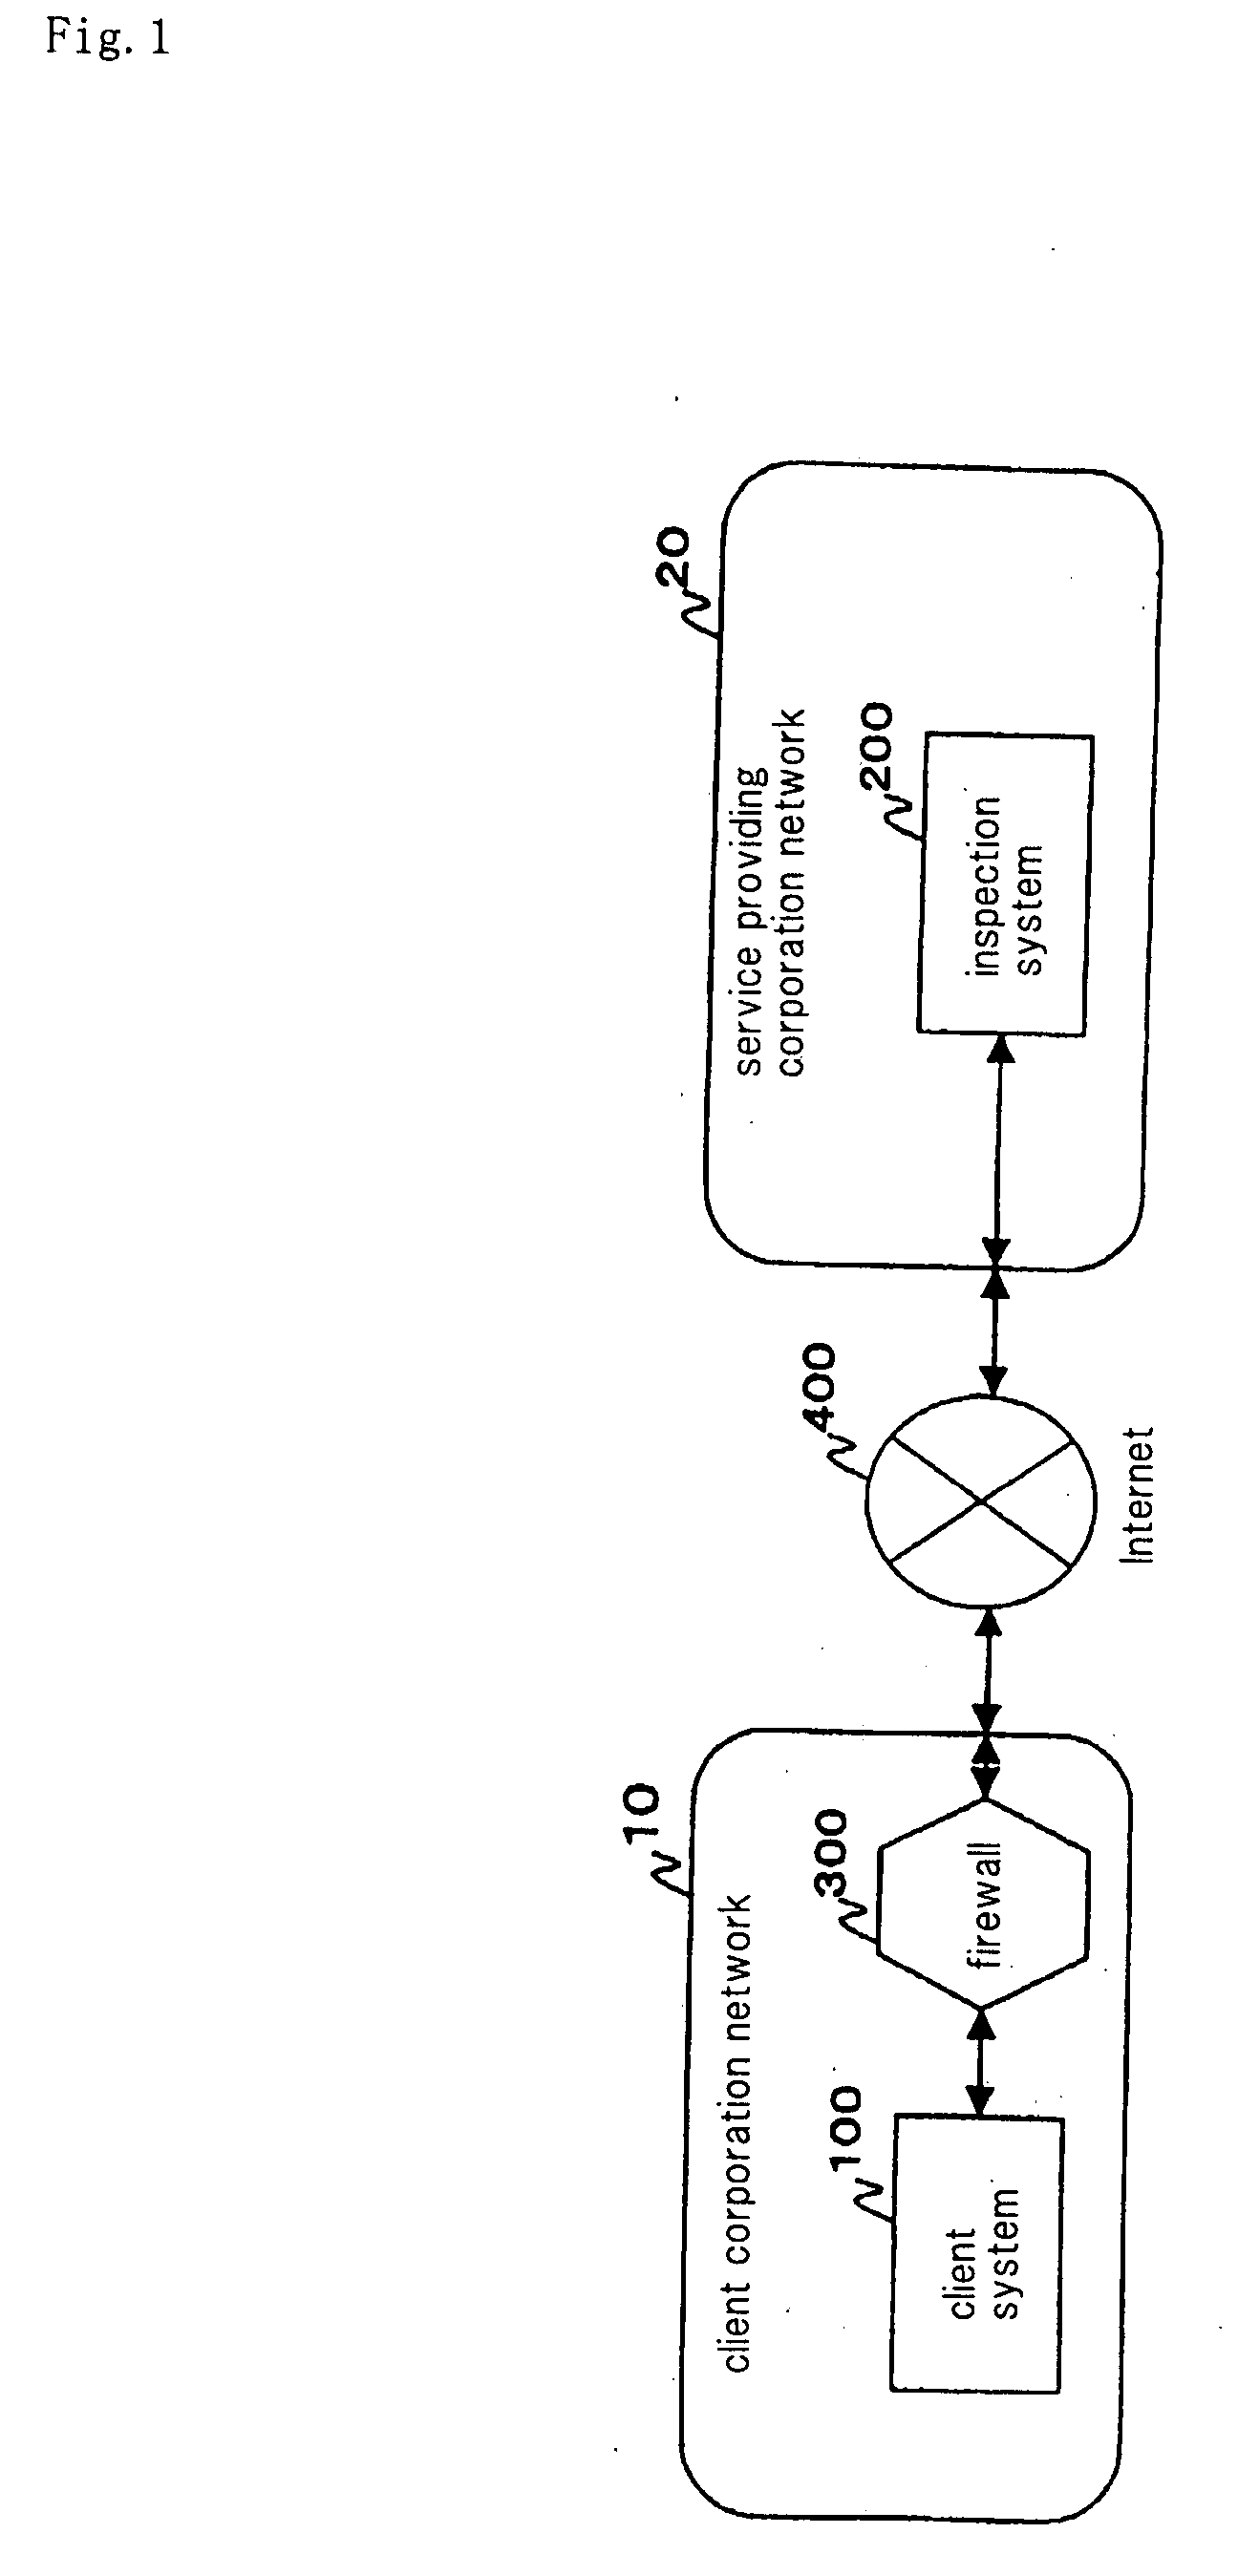 Firewall Inspecting System and Firewall Information Extraction System